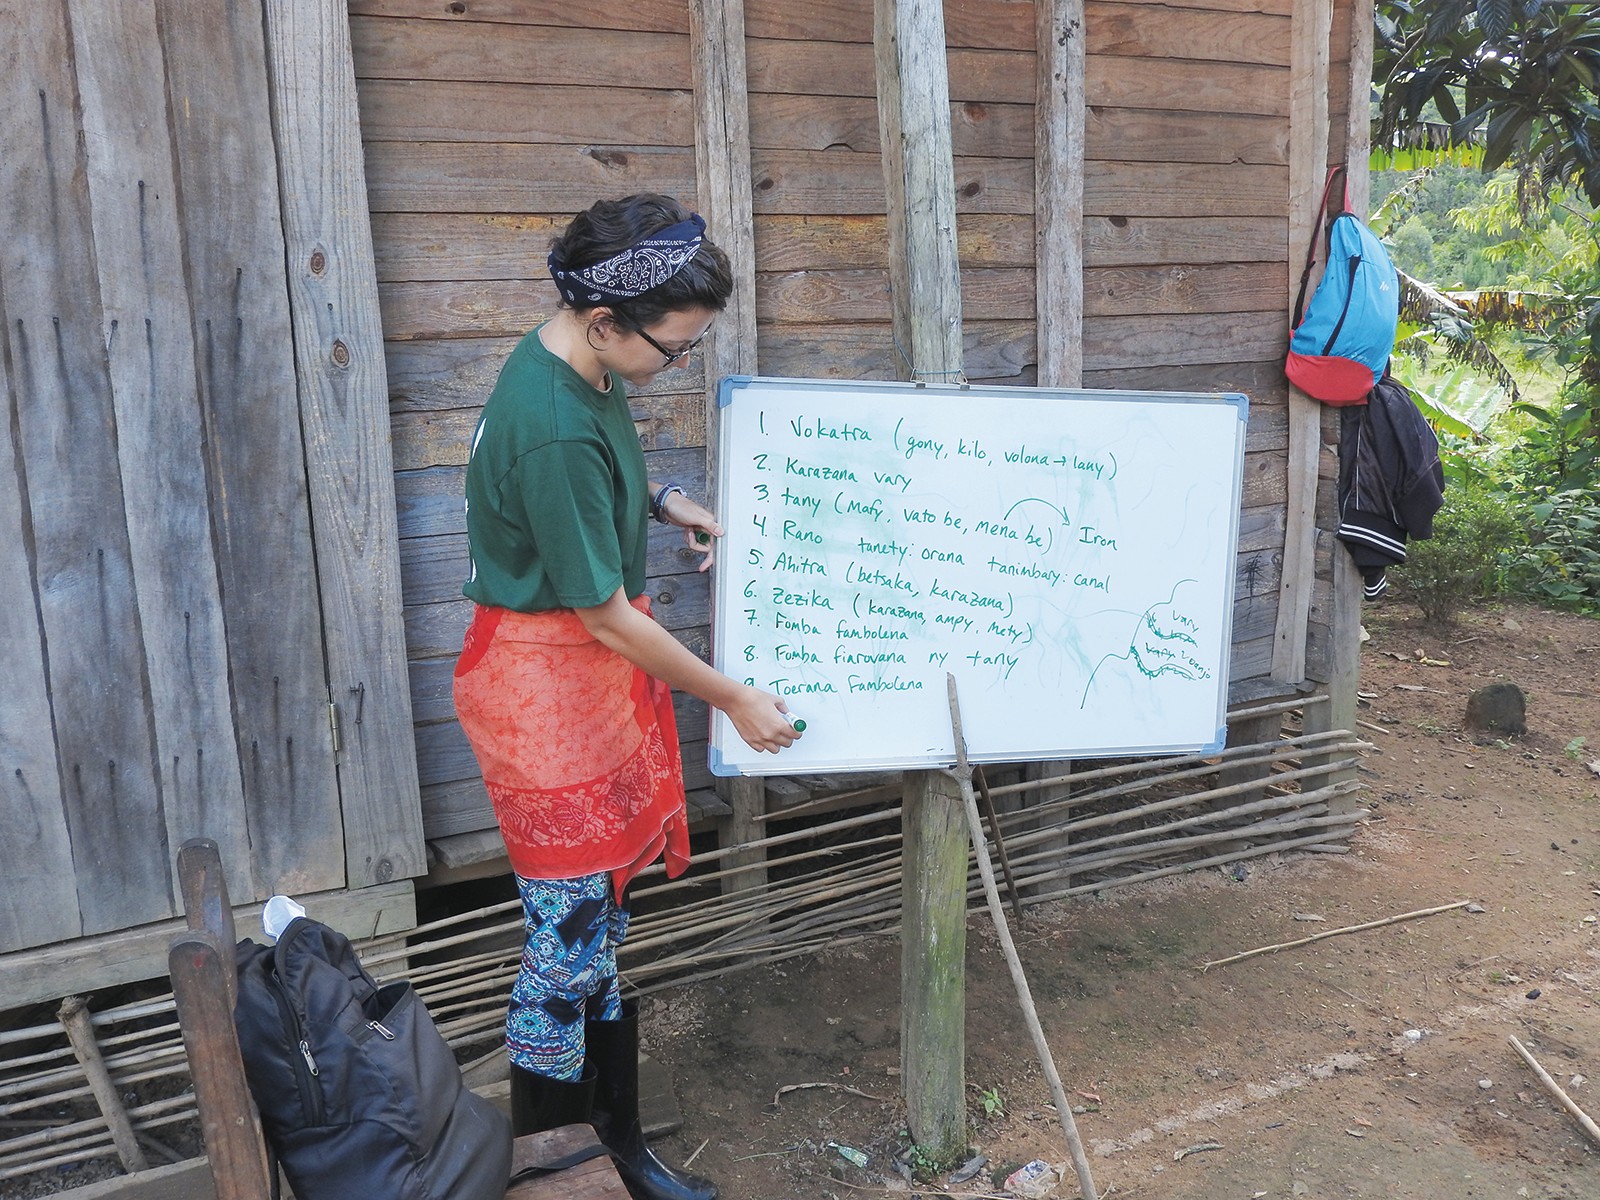 Karie Whitman guiding a focus group on rice agriculture (in Malagasy) in a village near Maromizaha Forest.